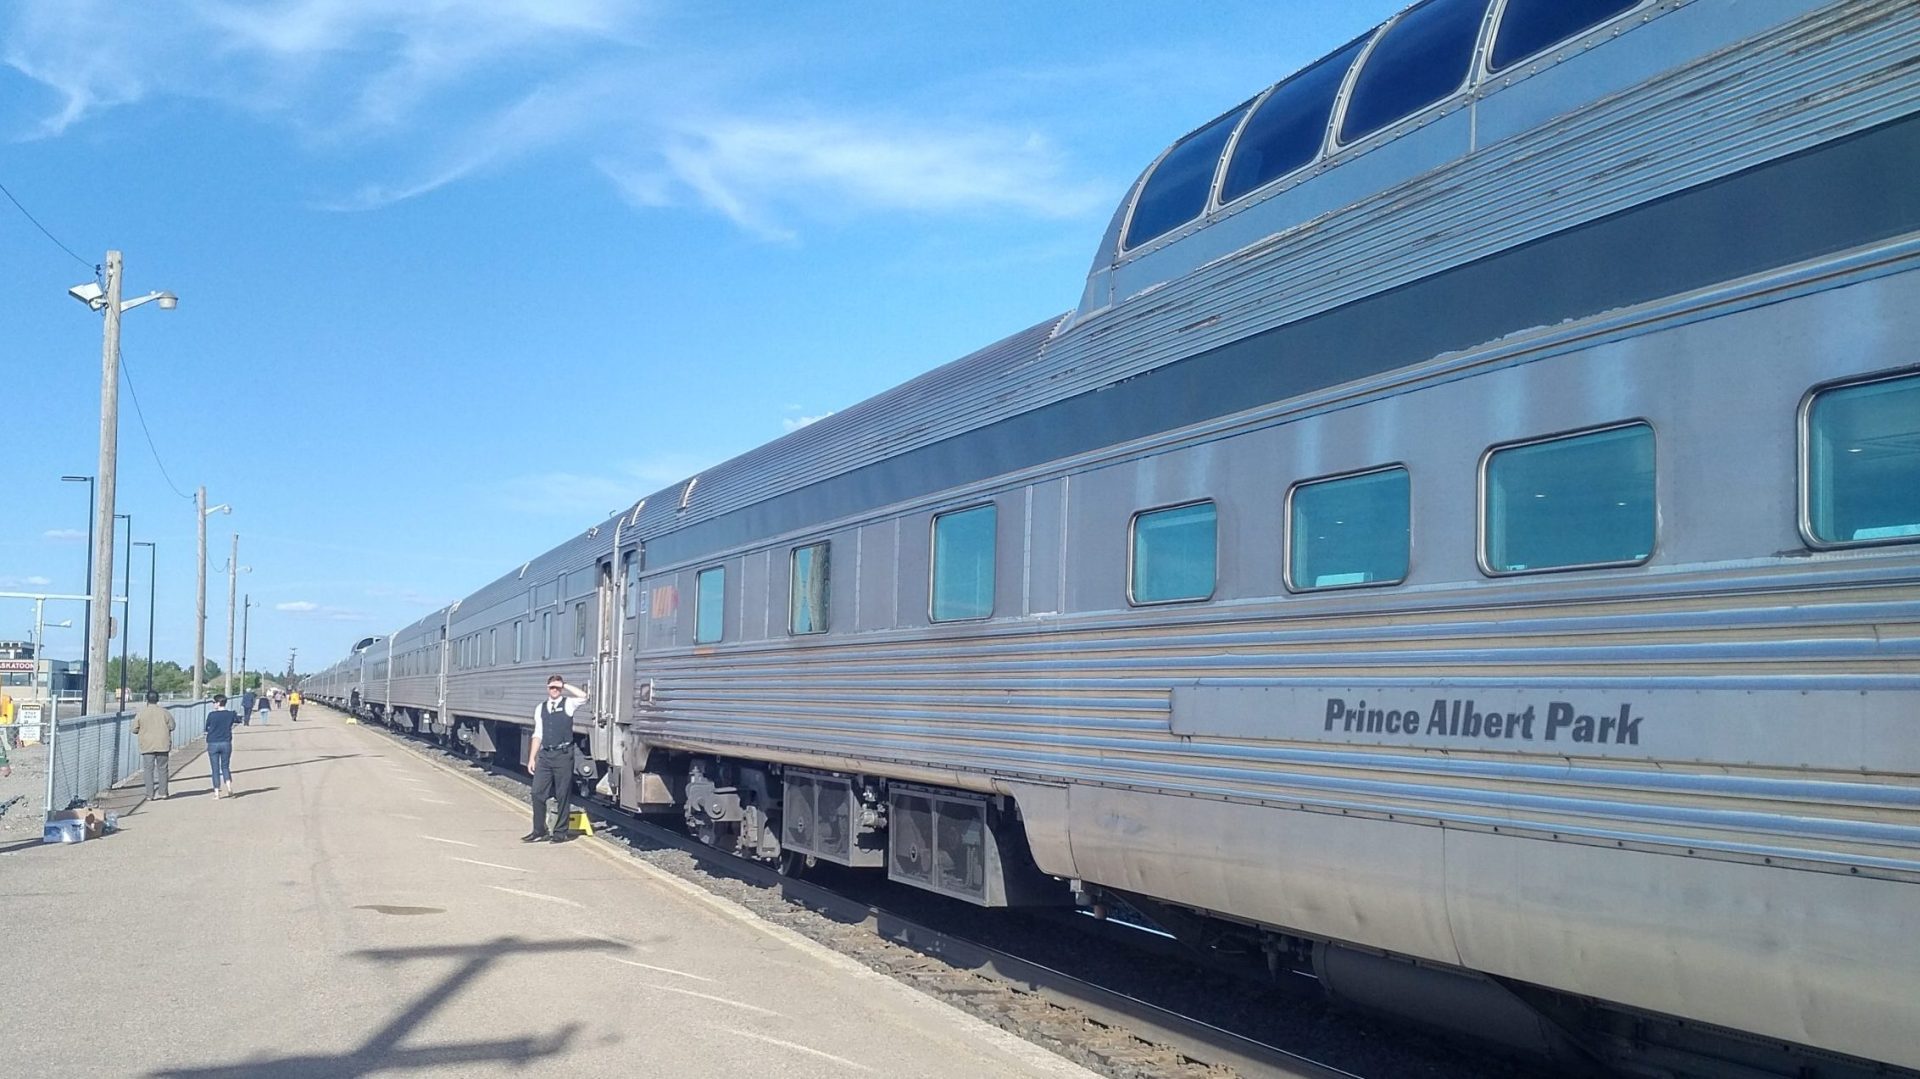 The Canadian calling at Saskatoon station in 2018, with dome car Prince Albert Park shown.